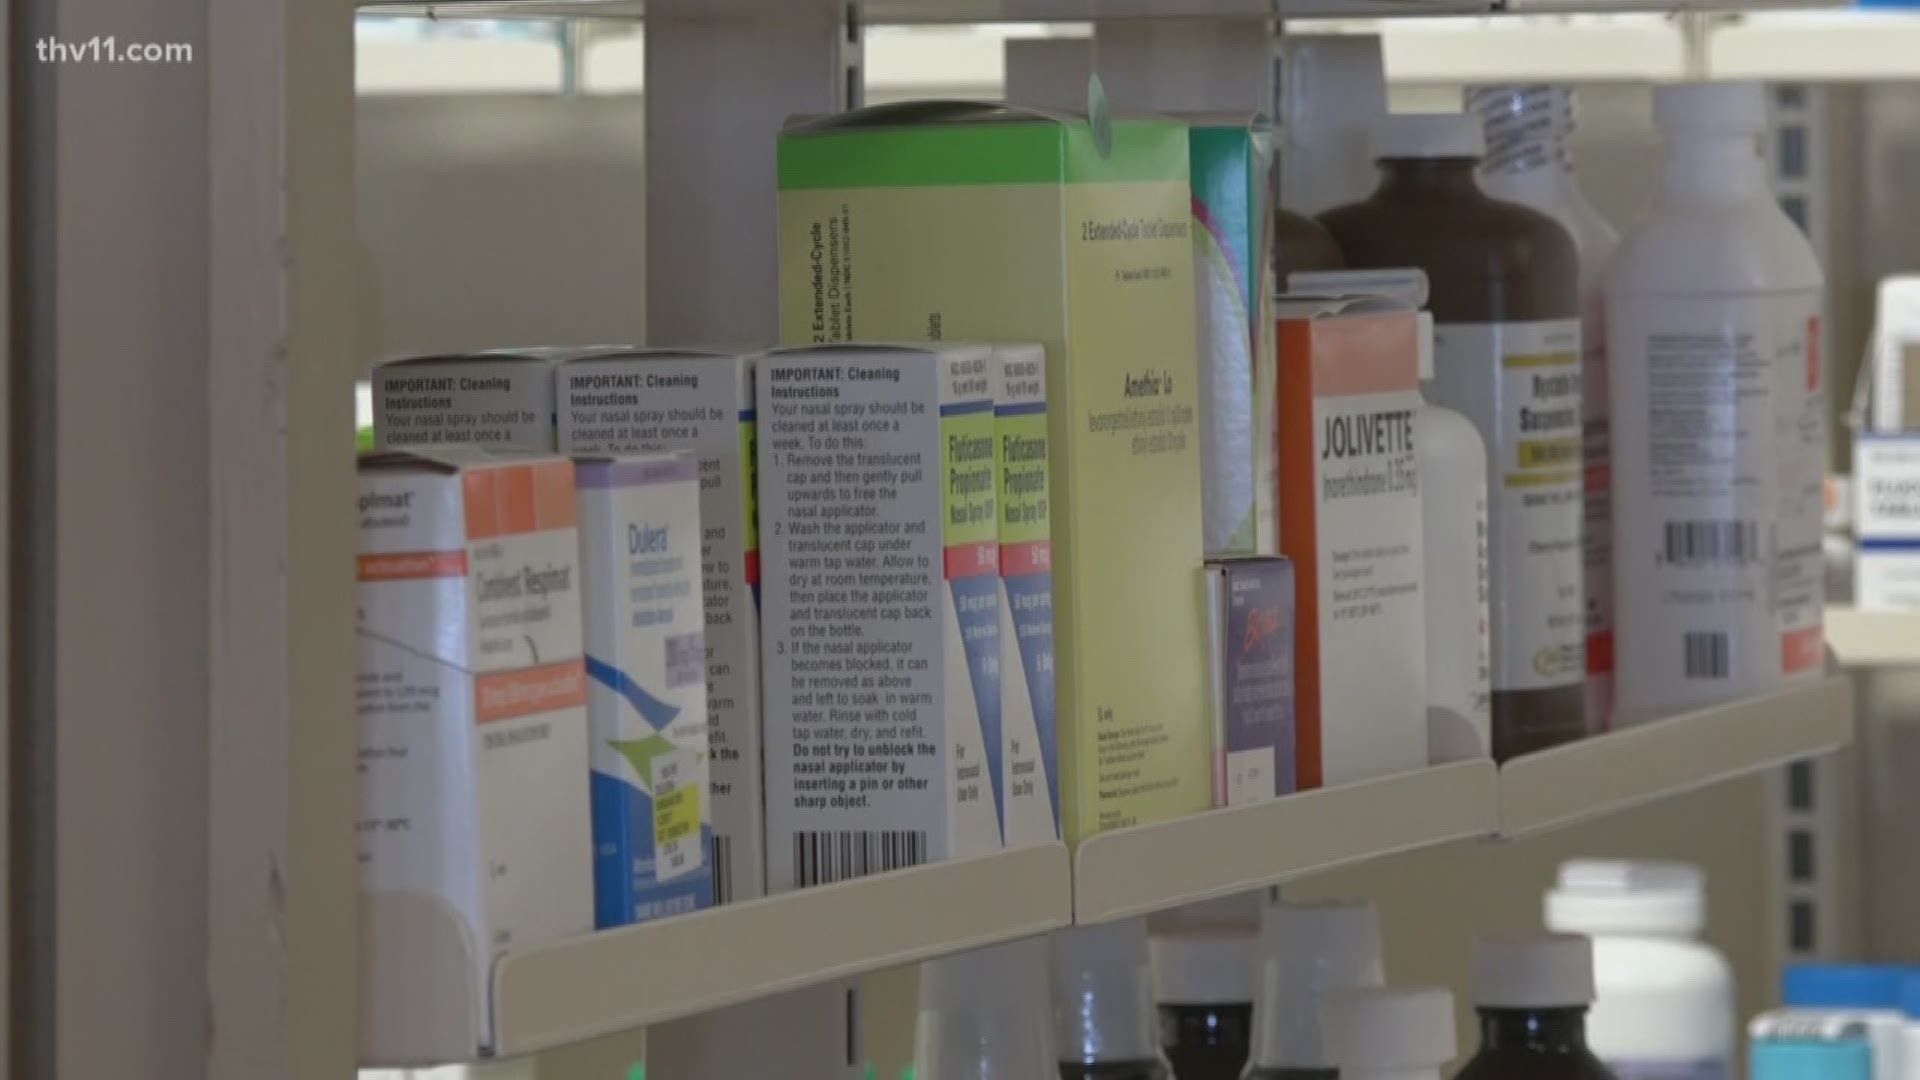 The long term goal for the Arkansas Medical Board is to reduce the number of prescriptions in the state.